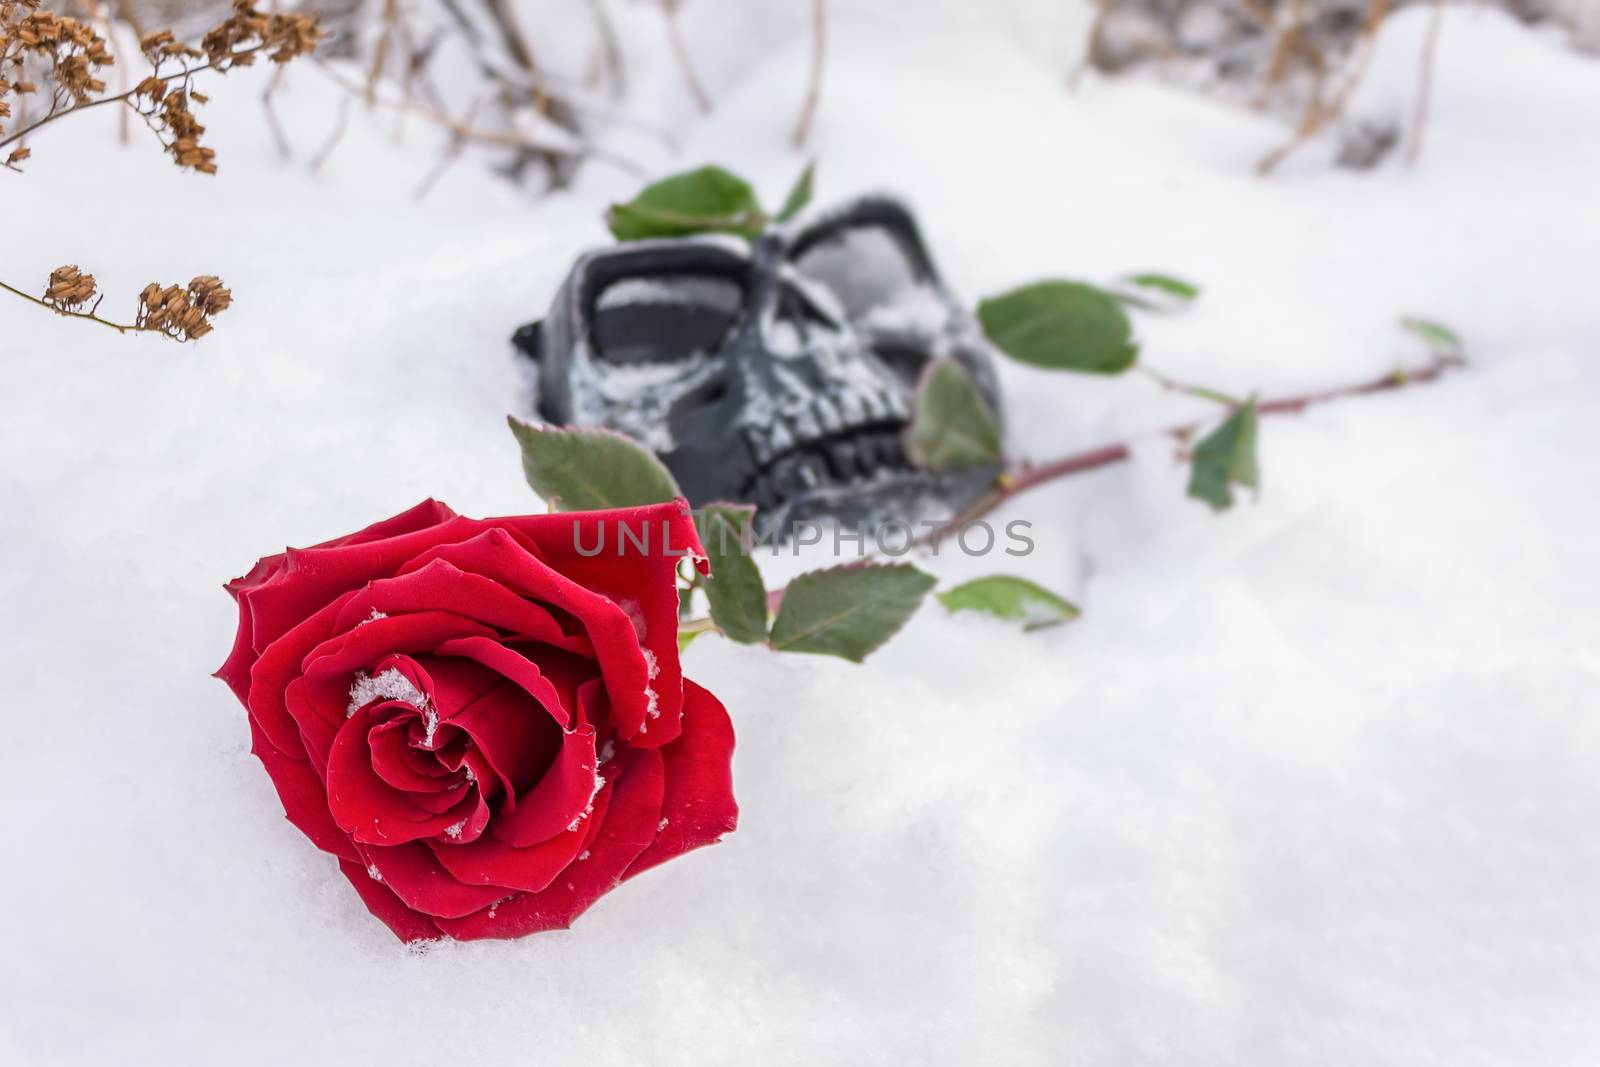 A red rose lies on a grave with a tombstone in the form of a skull mask in an old cemetery in winter